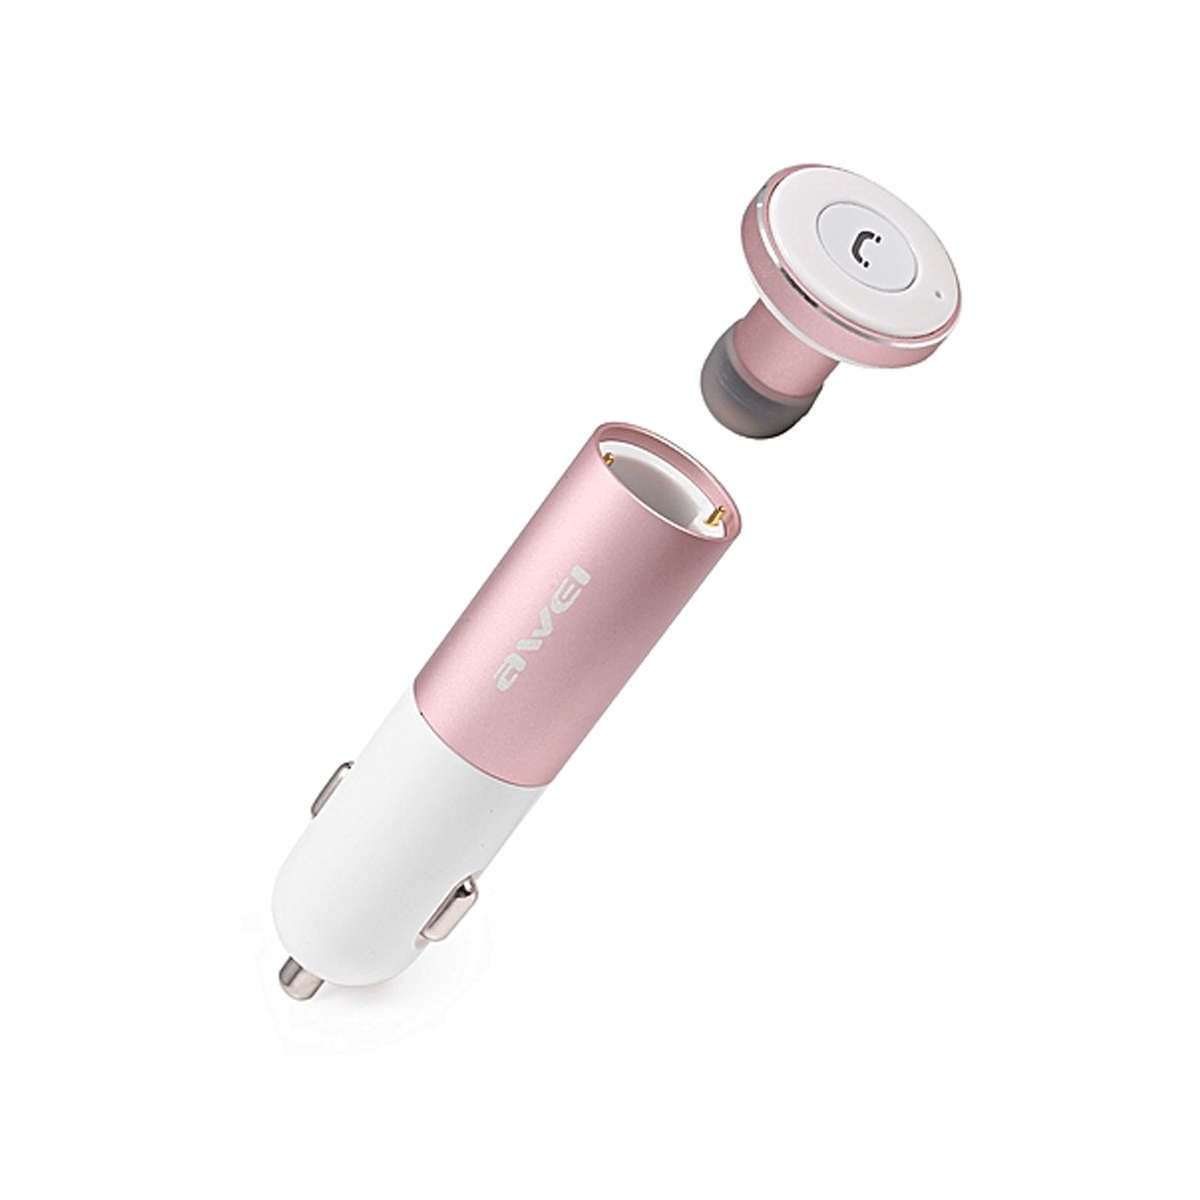 AWEI A870BL Headset 2 in 1 Multi-function Bluetooth V4.0 Hands-free Call 5V 2.1A USB Car Charger - SquareDubai